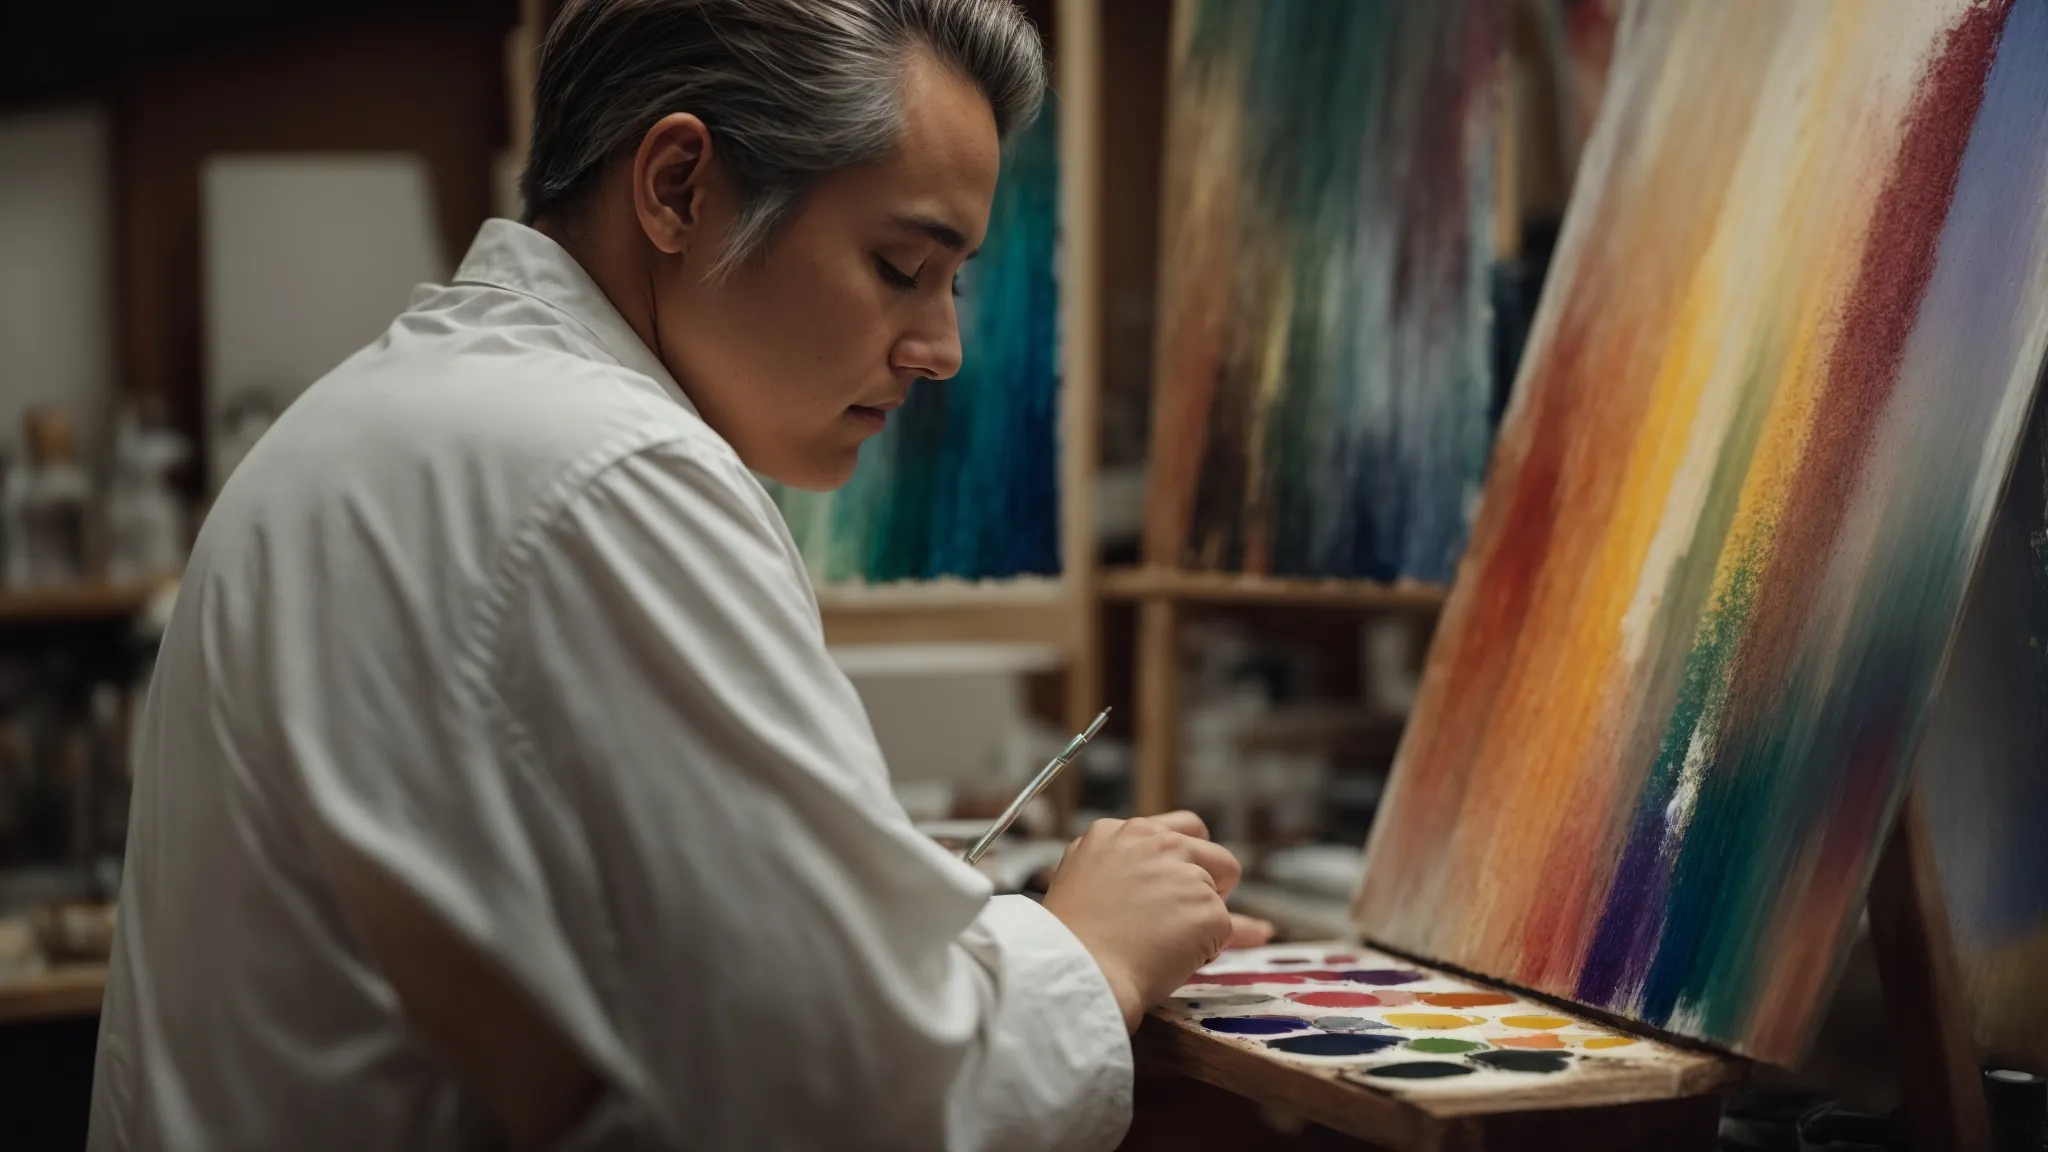 a masterful painter thoughtfully contemplating a colorful palette, poised to create a masterpiece.